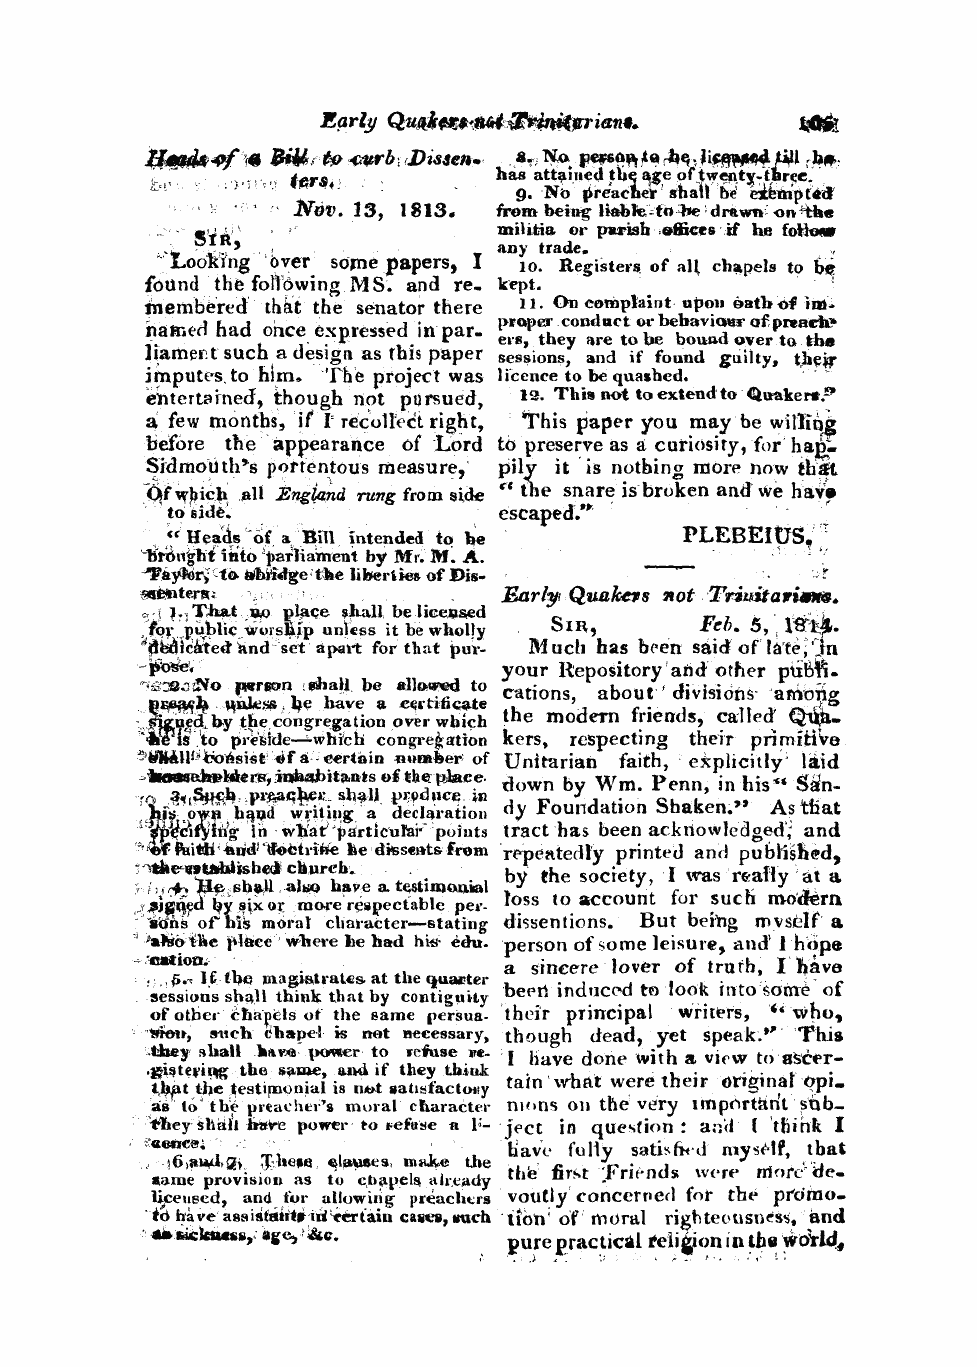 Monthly Repository (1806-1838) and Unitarian Chronicle (1832-1833): F Y, 1st edition: 29